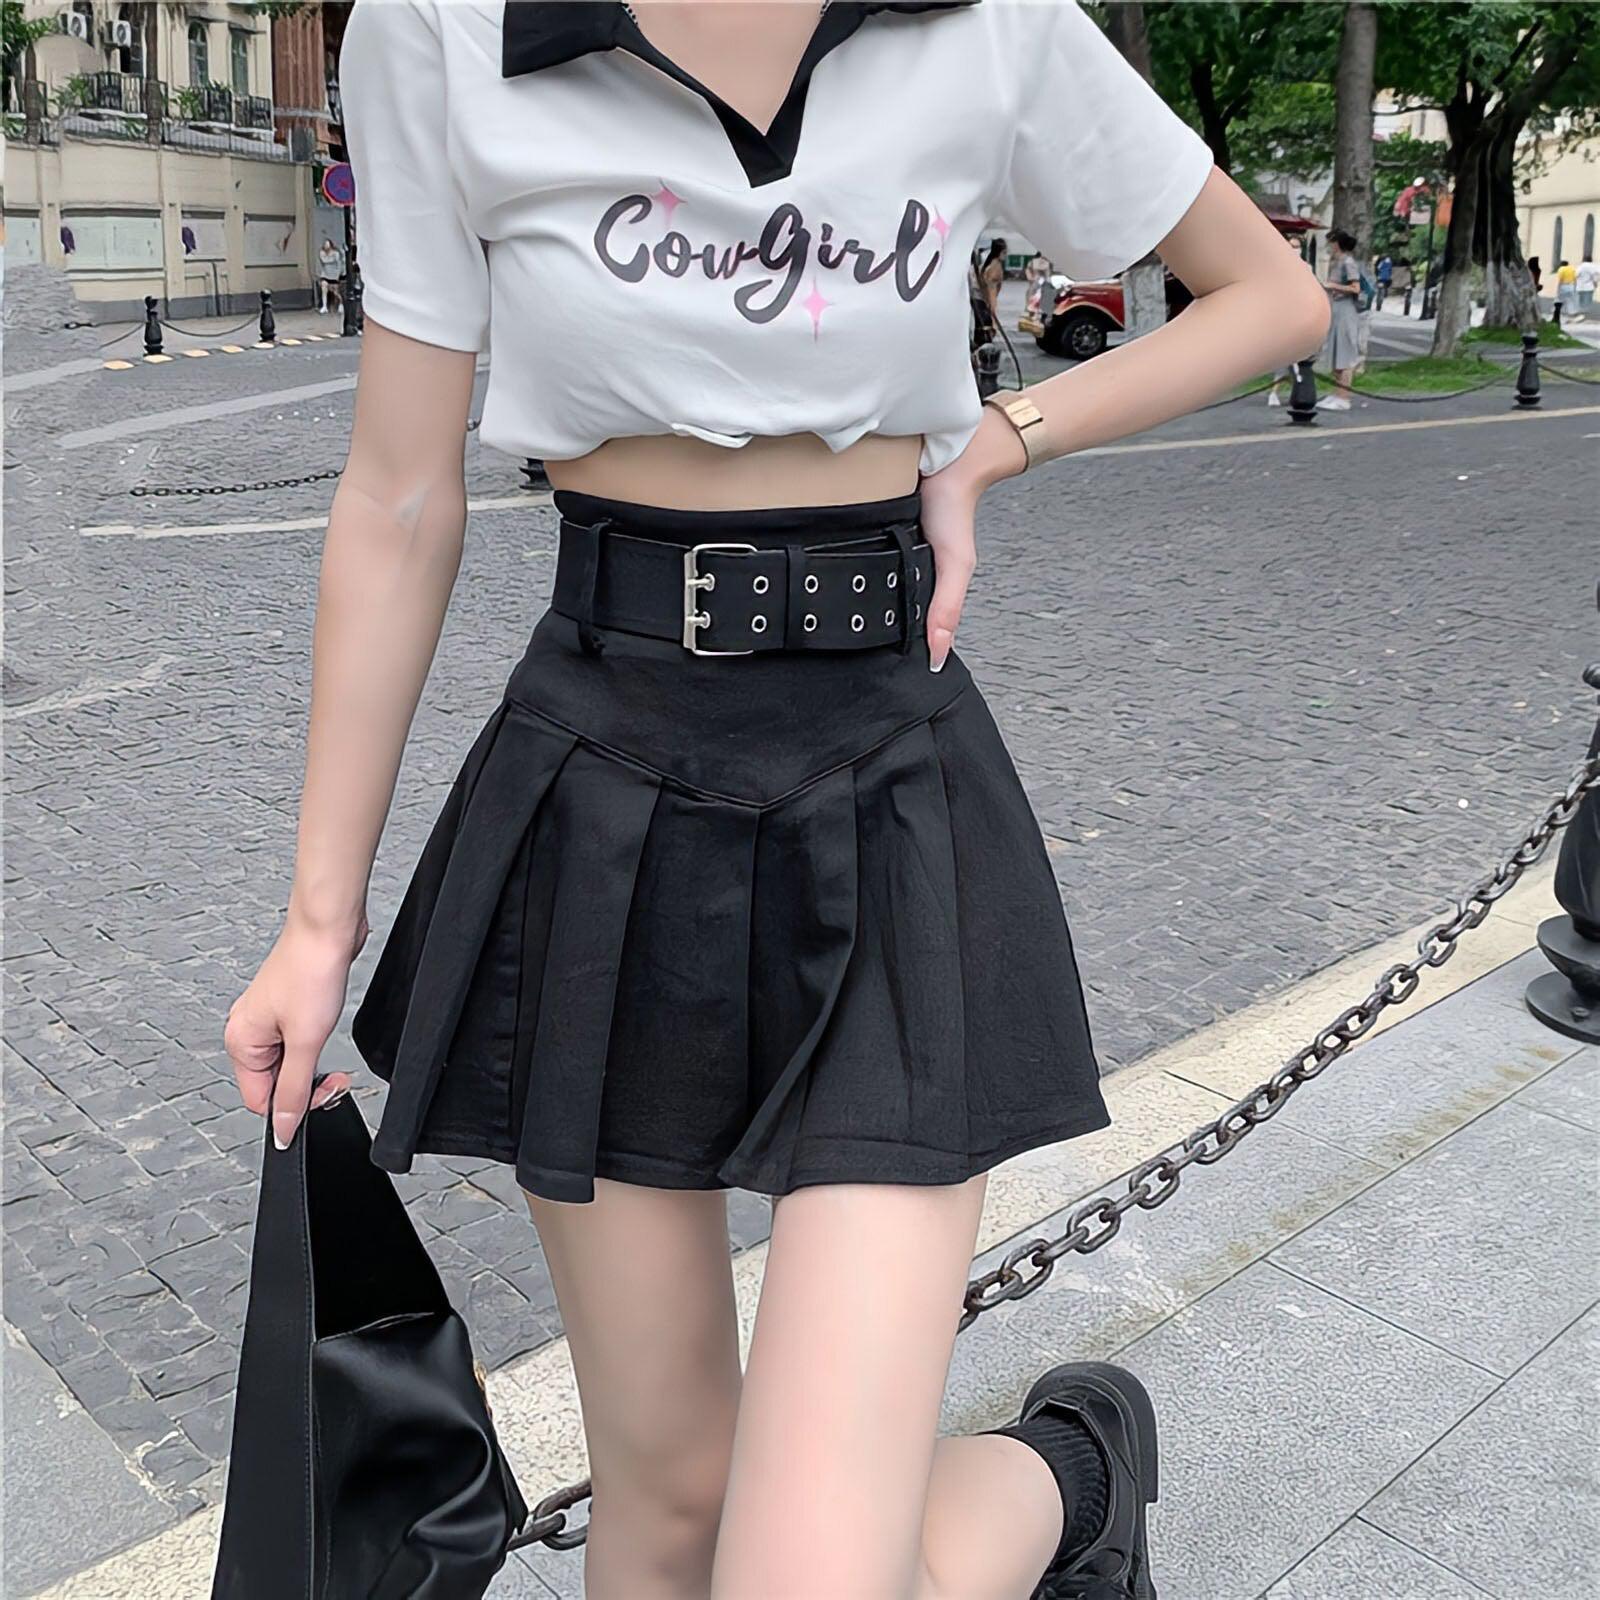  Other Stories high waist belted mini skirt in black